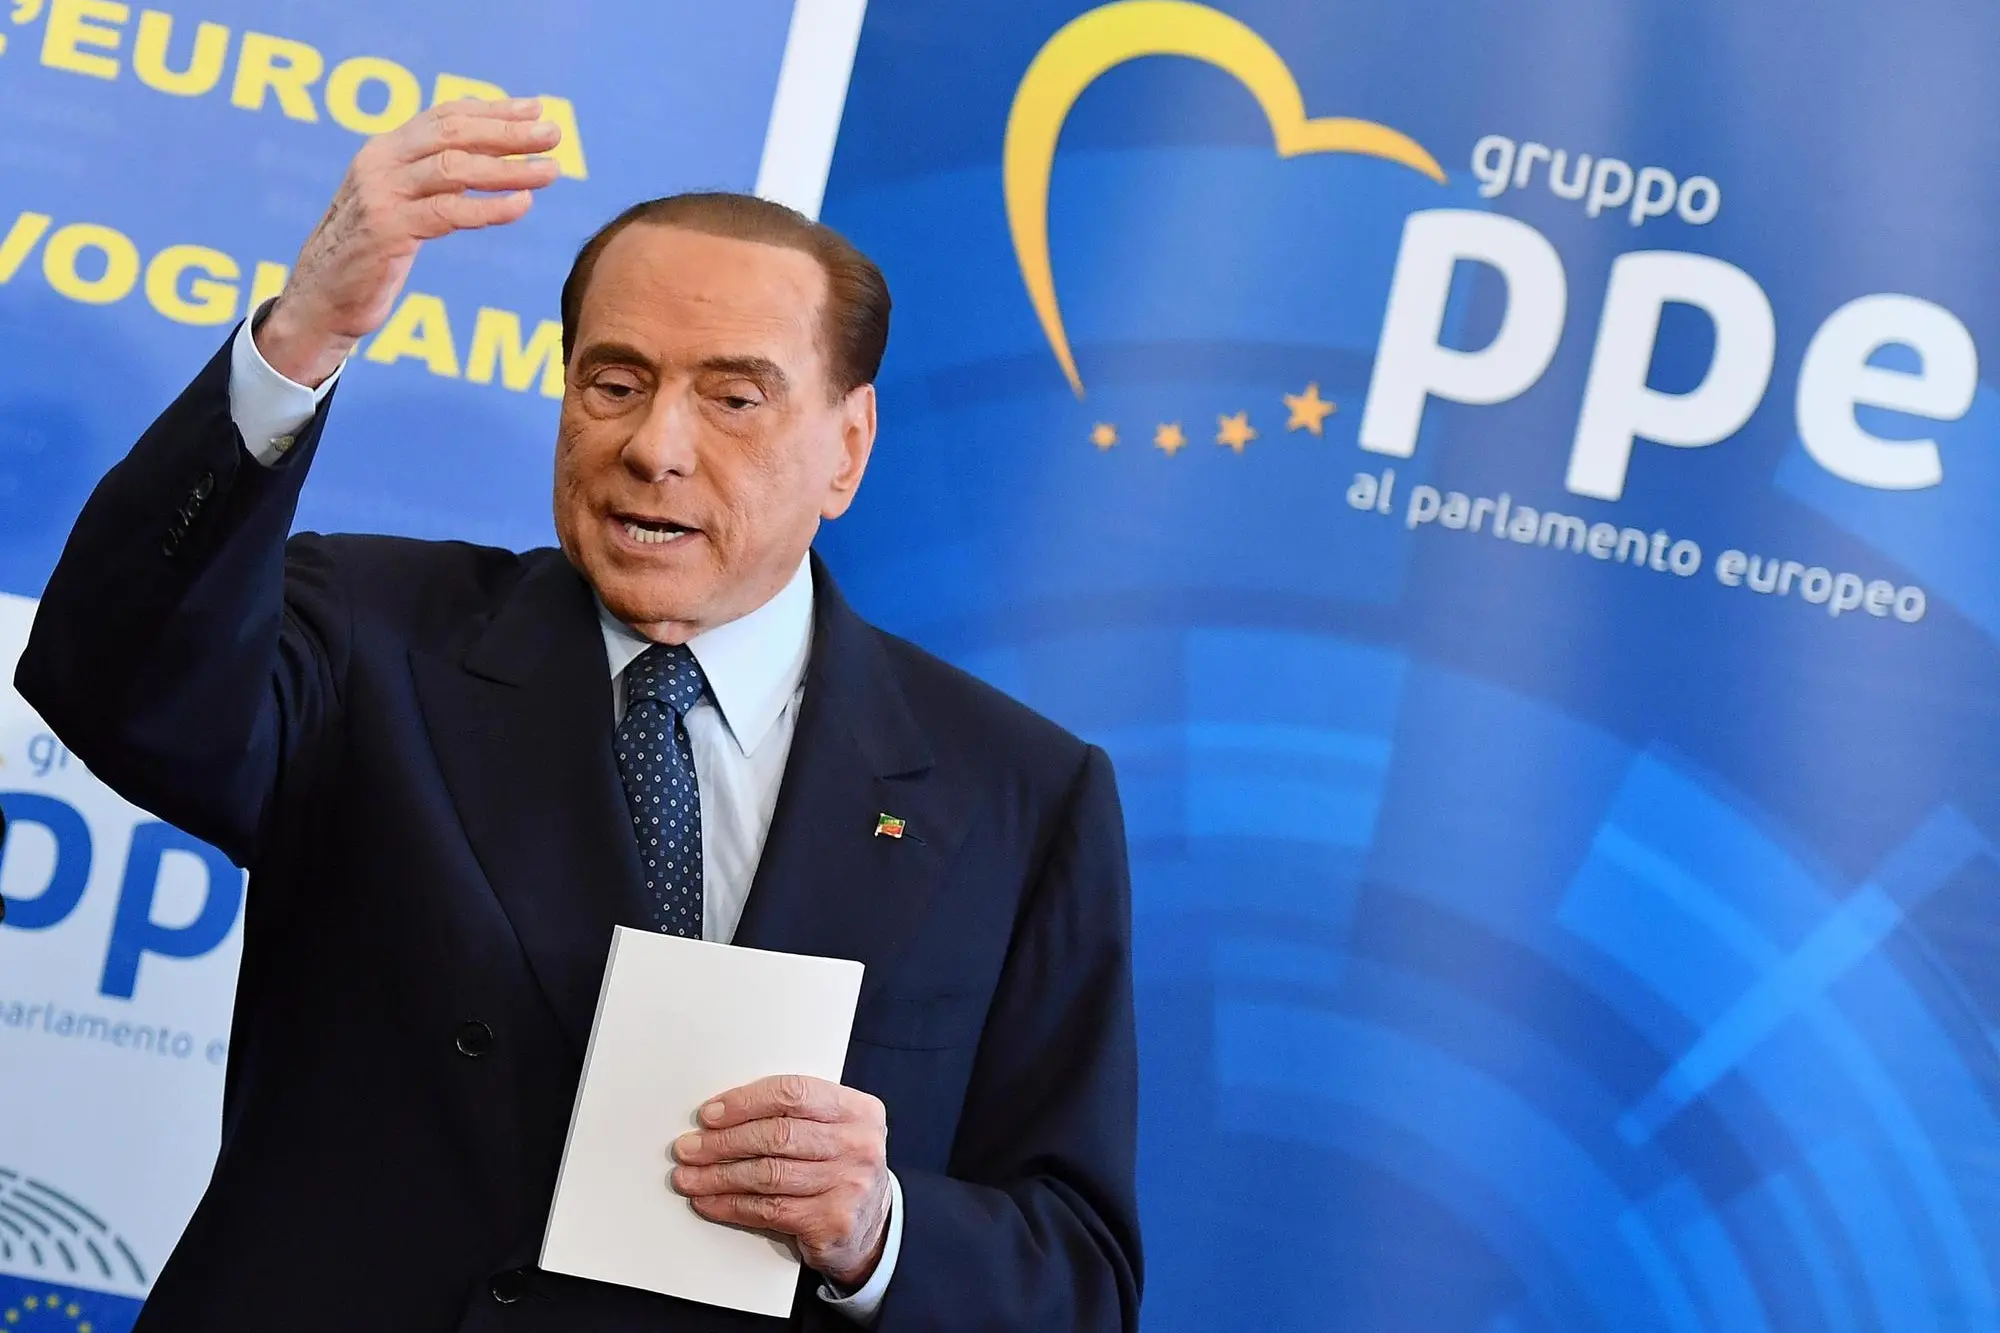 Italian 'Forza Italia' (FI) party leader and former Italian Prime Minister Silvio Berlusconi gestures as he meets Chairman of the EPP - European People's Party Group in the European Parliament, Manfred Weber (not pictured), at 'Forza Italia' (FI) party headquarter, Rome, 21 February 2018. ANSA / ETTORE FERRARI